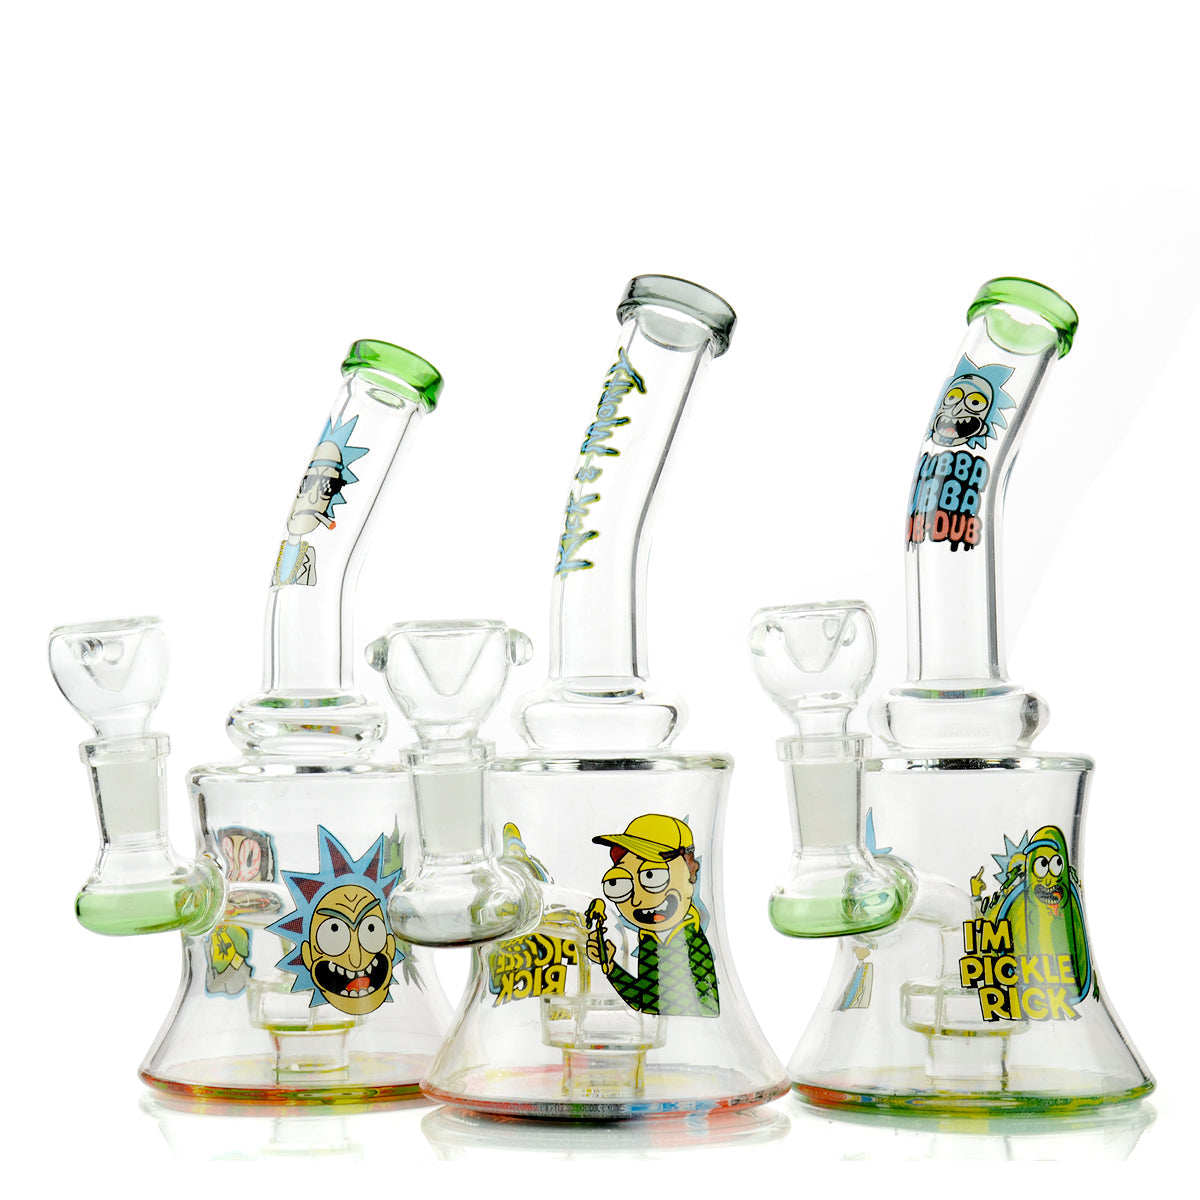 "Bent Neck Water Pipe with Sticker" - 7" (225g)